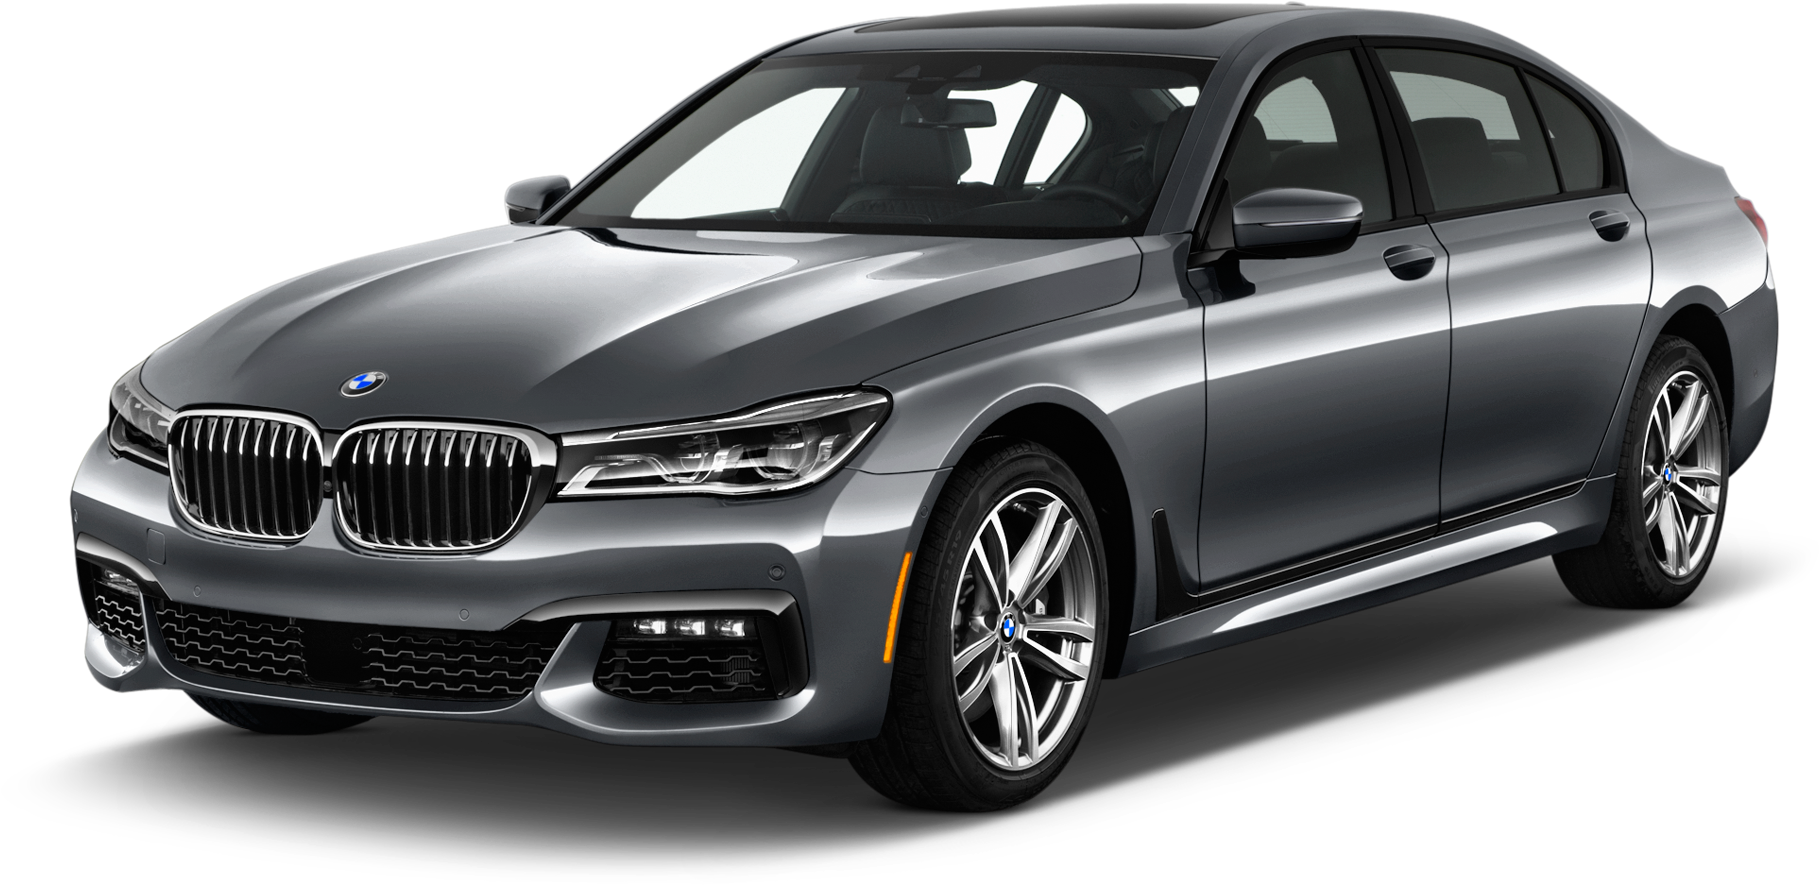 BMW 7 Series 2019 PNG Images HD